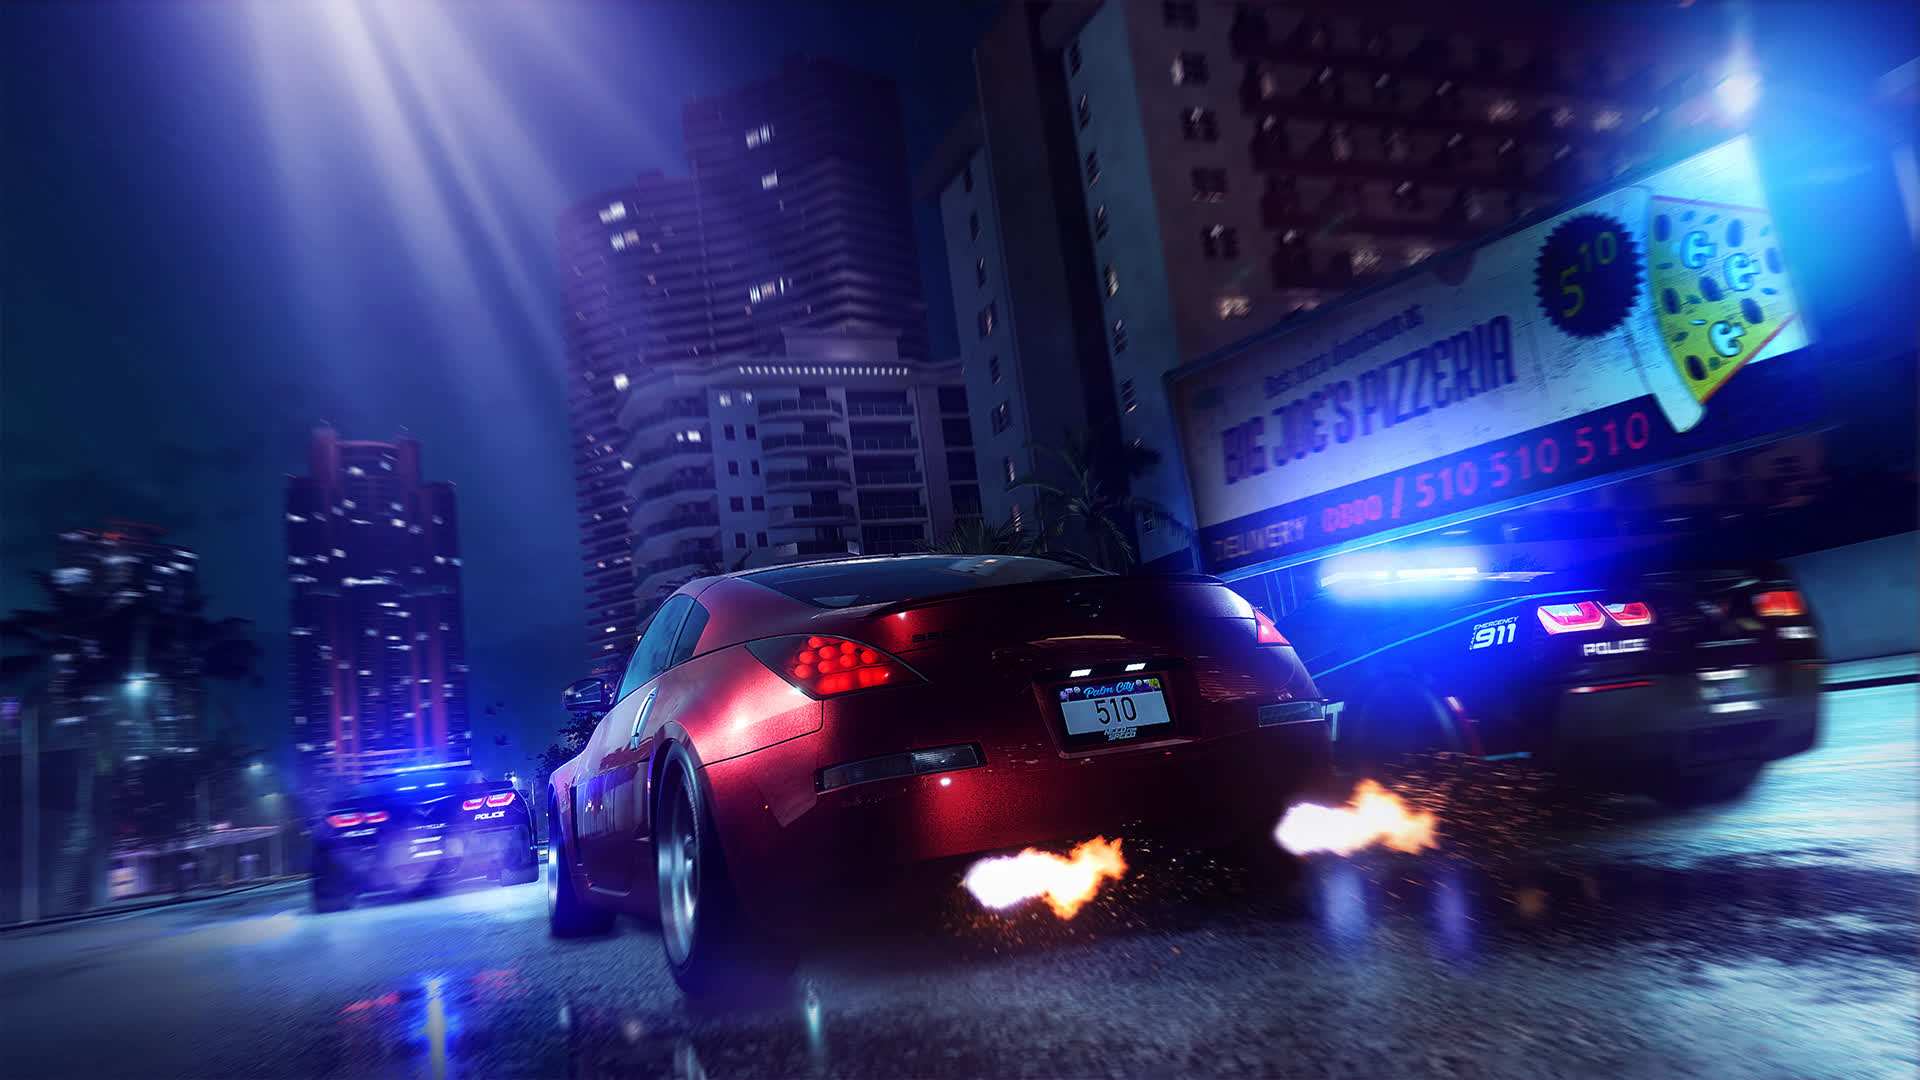 EA is preparing a remaster of 2010's Need for Speed: Hot Pursuit